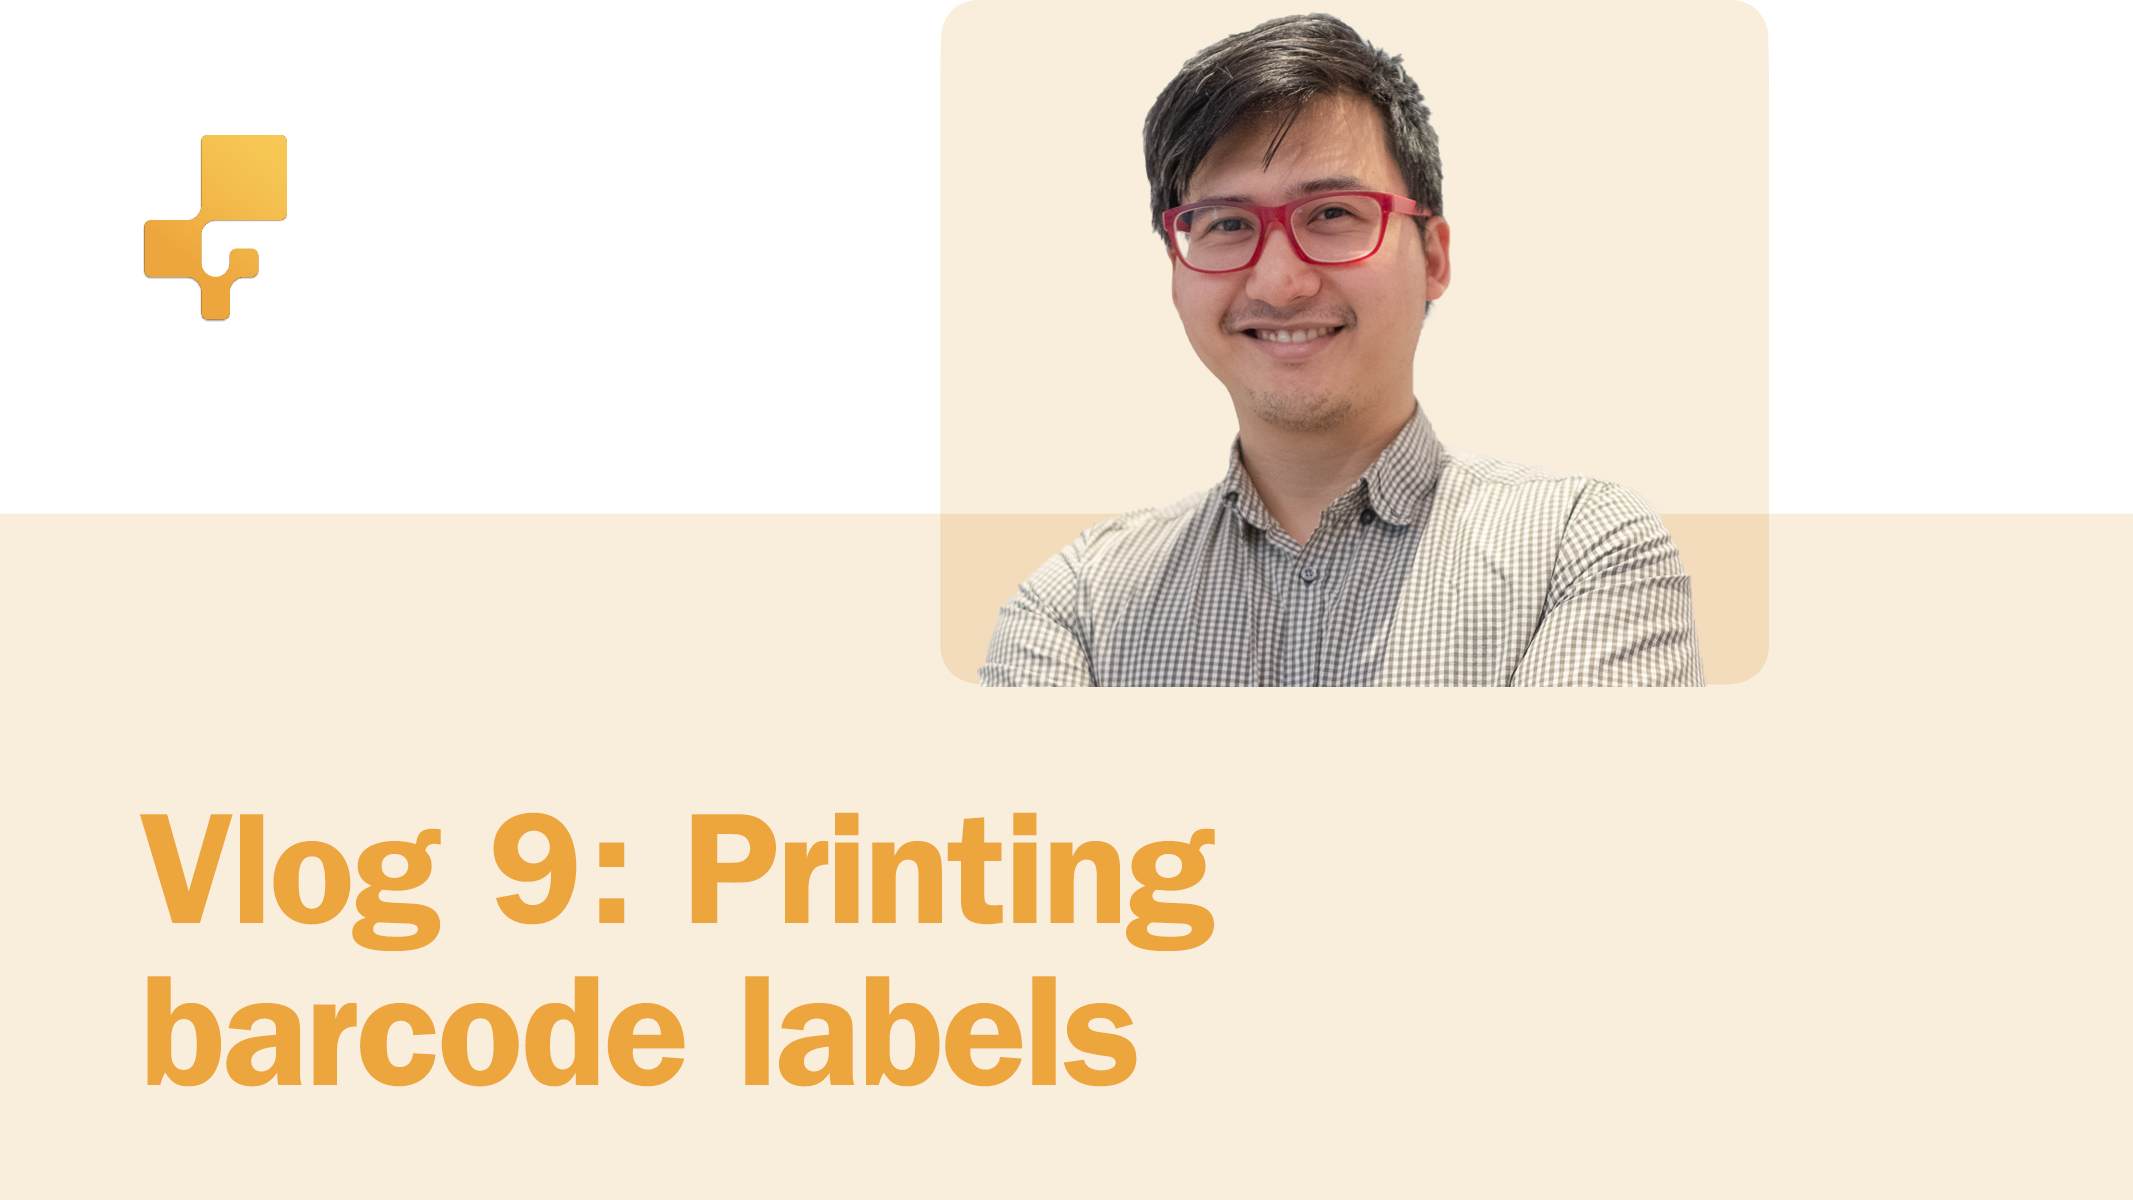 inFlow Vlog #9: Generating and printing barcode labels with DYMO printers